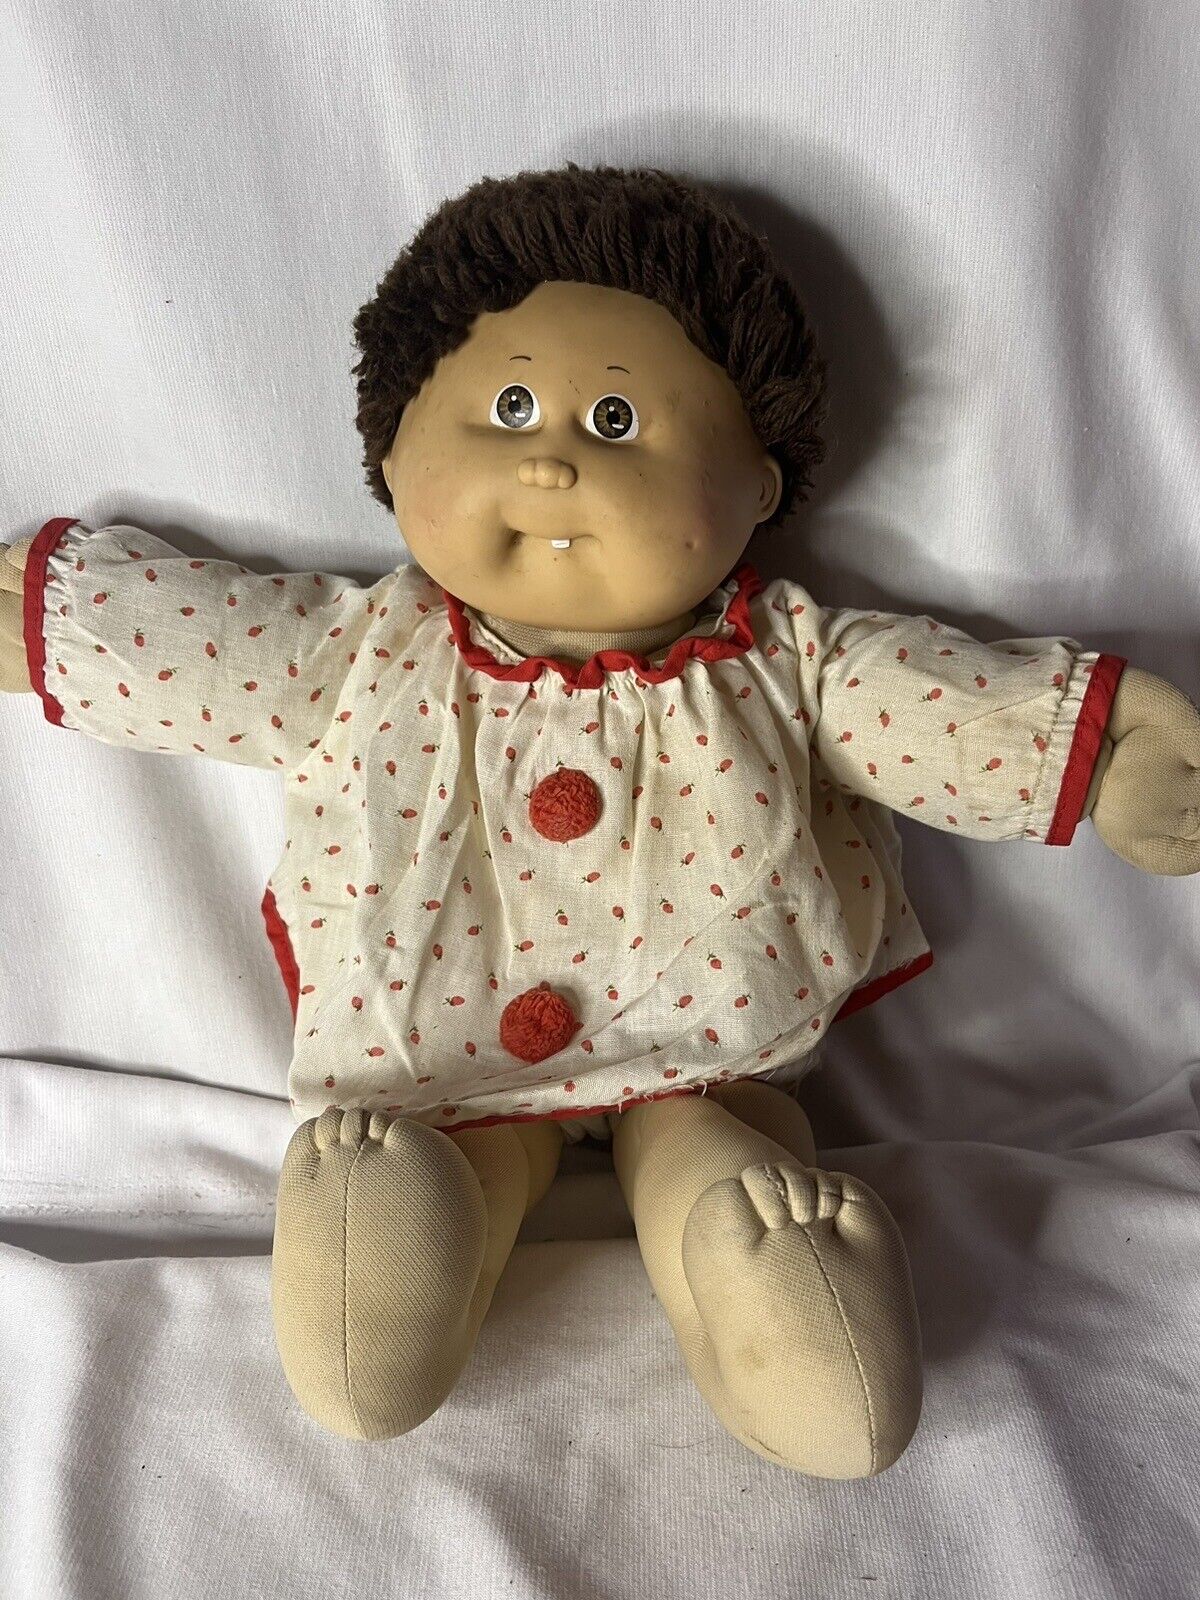 Cabbage Patch Kids Vintage Girl Doll 1984 Coleco 16” Light Brown Skin Red Hair